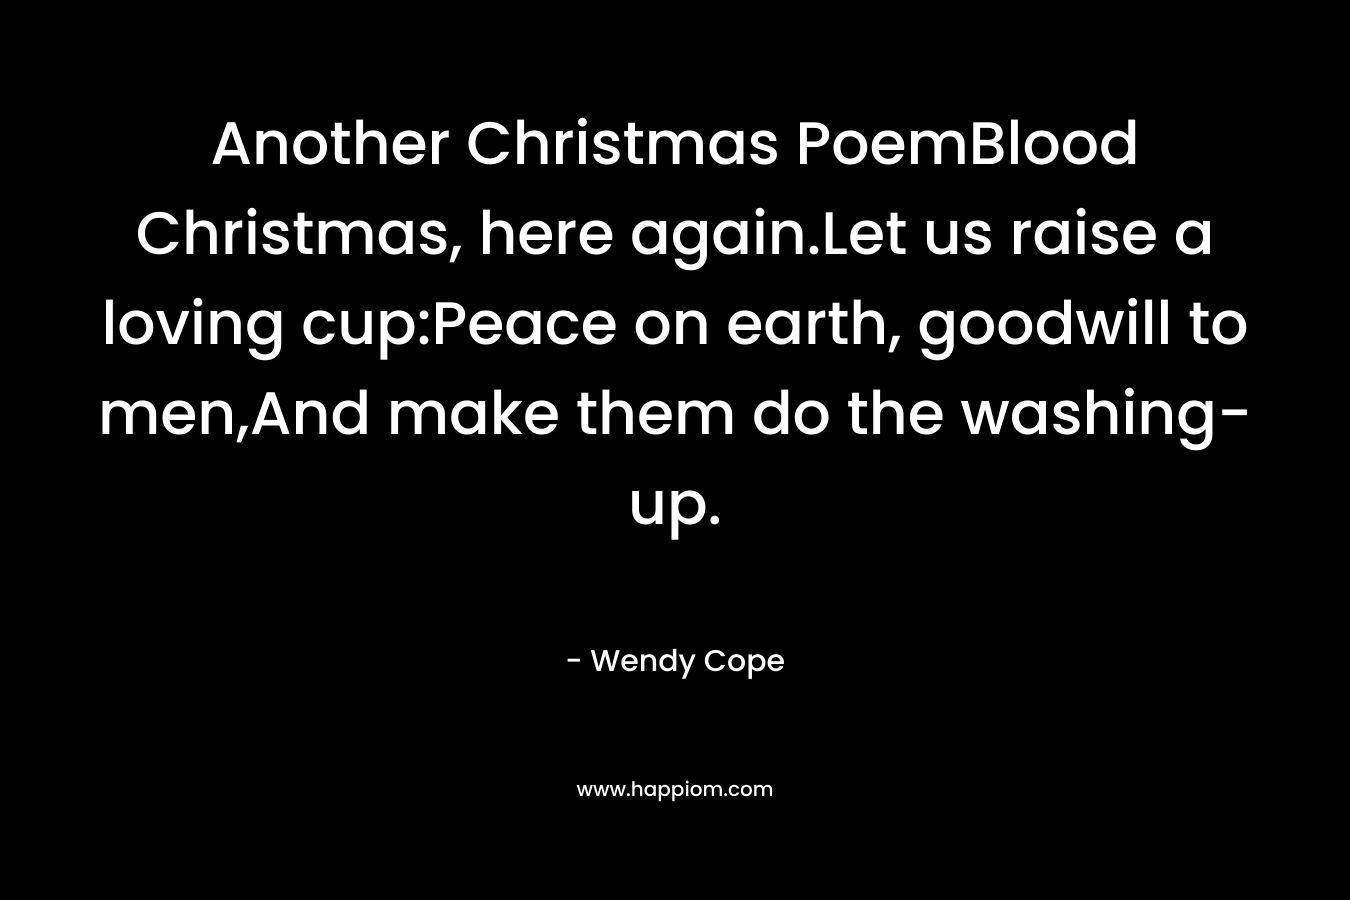 Another Christmas PoemBlood Christmas, here again.Let us raise a loving cup:Peace on earth, goodwill to men,And make them do the washing-up. – Wendy Cope